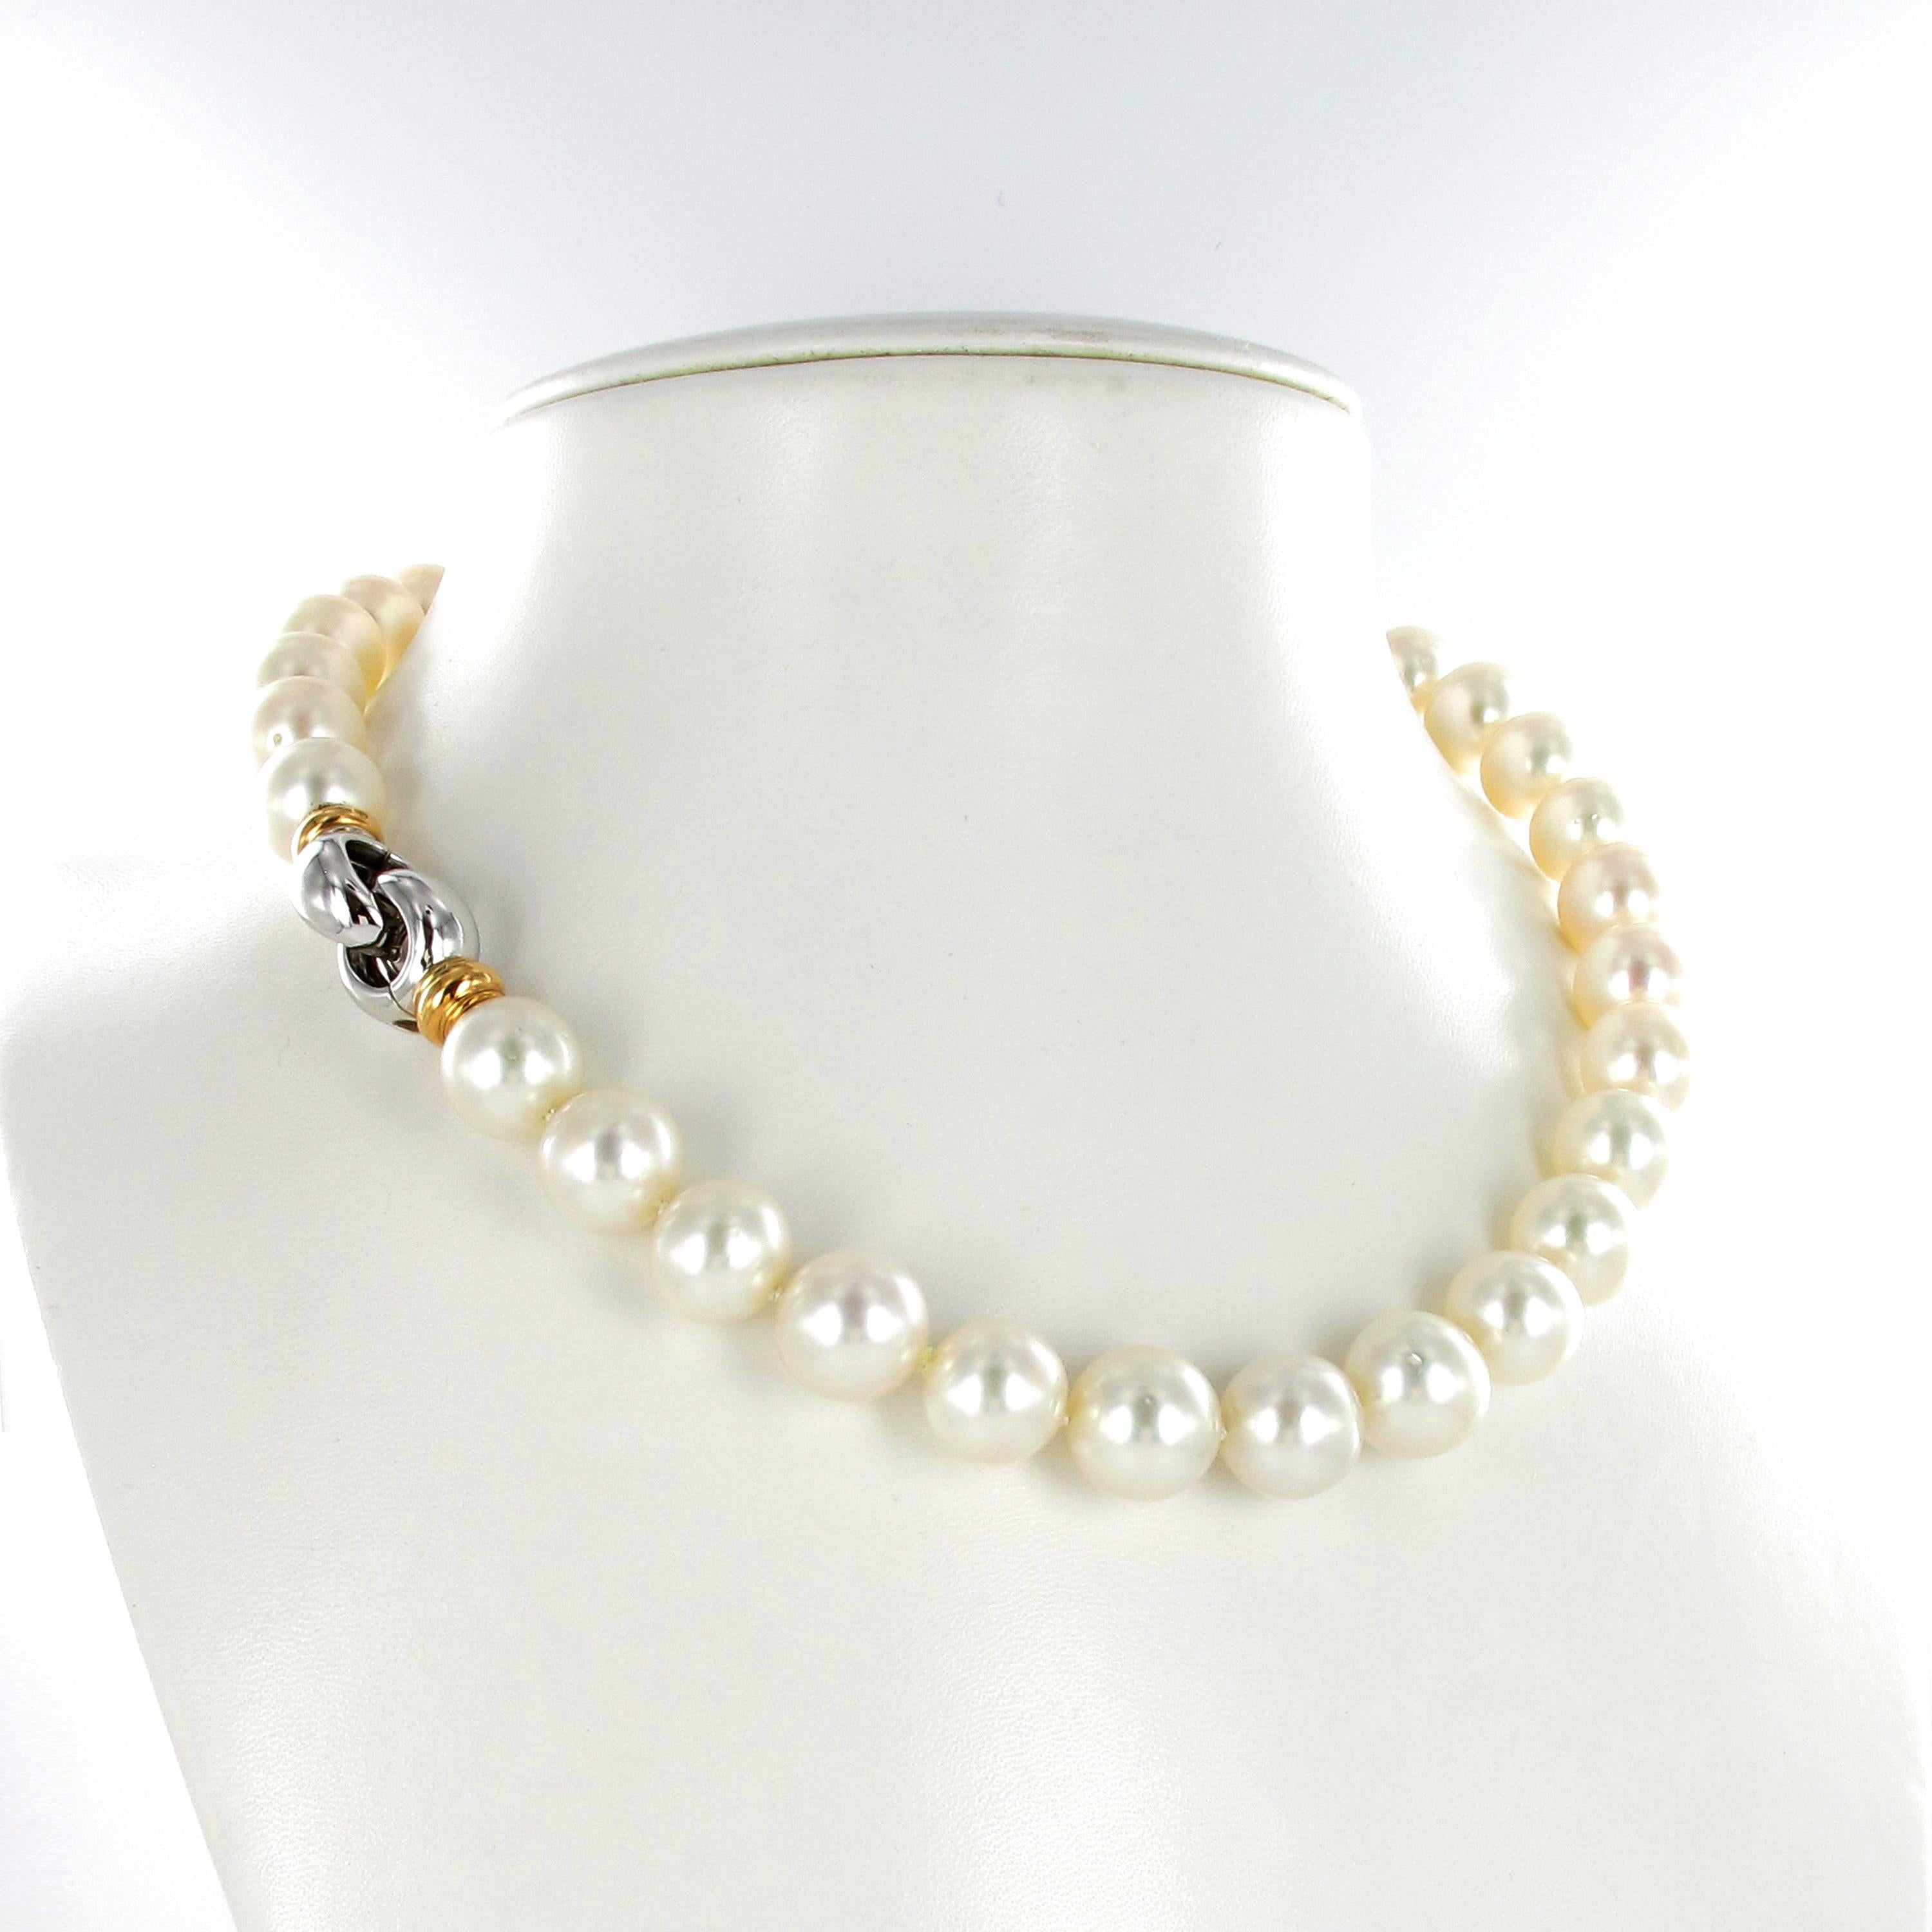 This strand consists of 33 near round white South Sea cultured pearls from 13.0 mm to 13.9 mm with a very good luster. Decorated with a clasp in 18 karat white and rose gold.

Length: 48.0 cm / 18.89 Inches
Maker's mark: Gubelin
Assay mark: 750